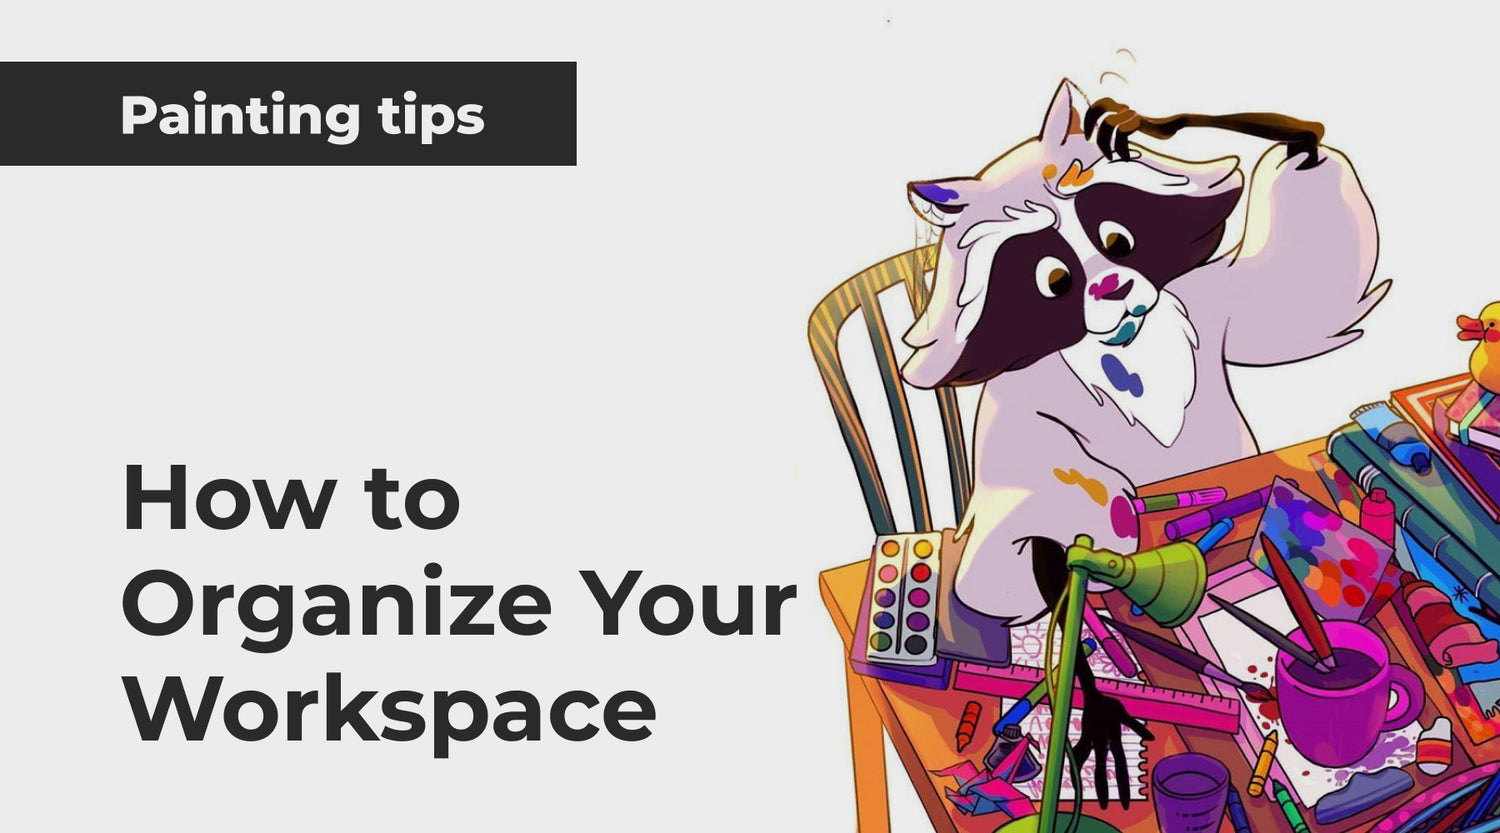 How to Organize Your Workspace: Tips from Raccoon Artie | Artistro